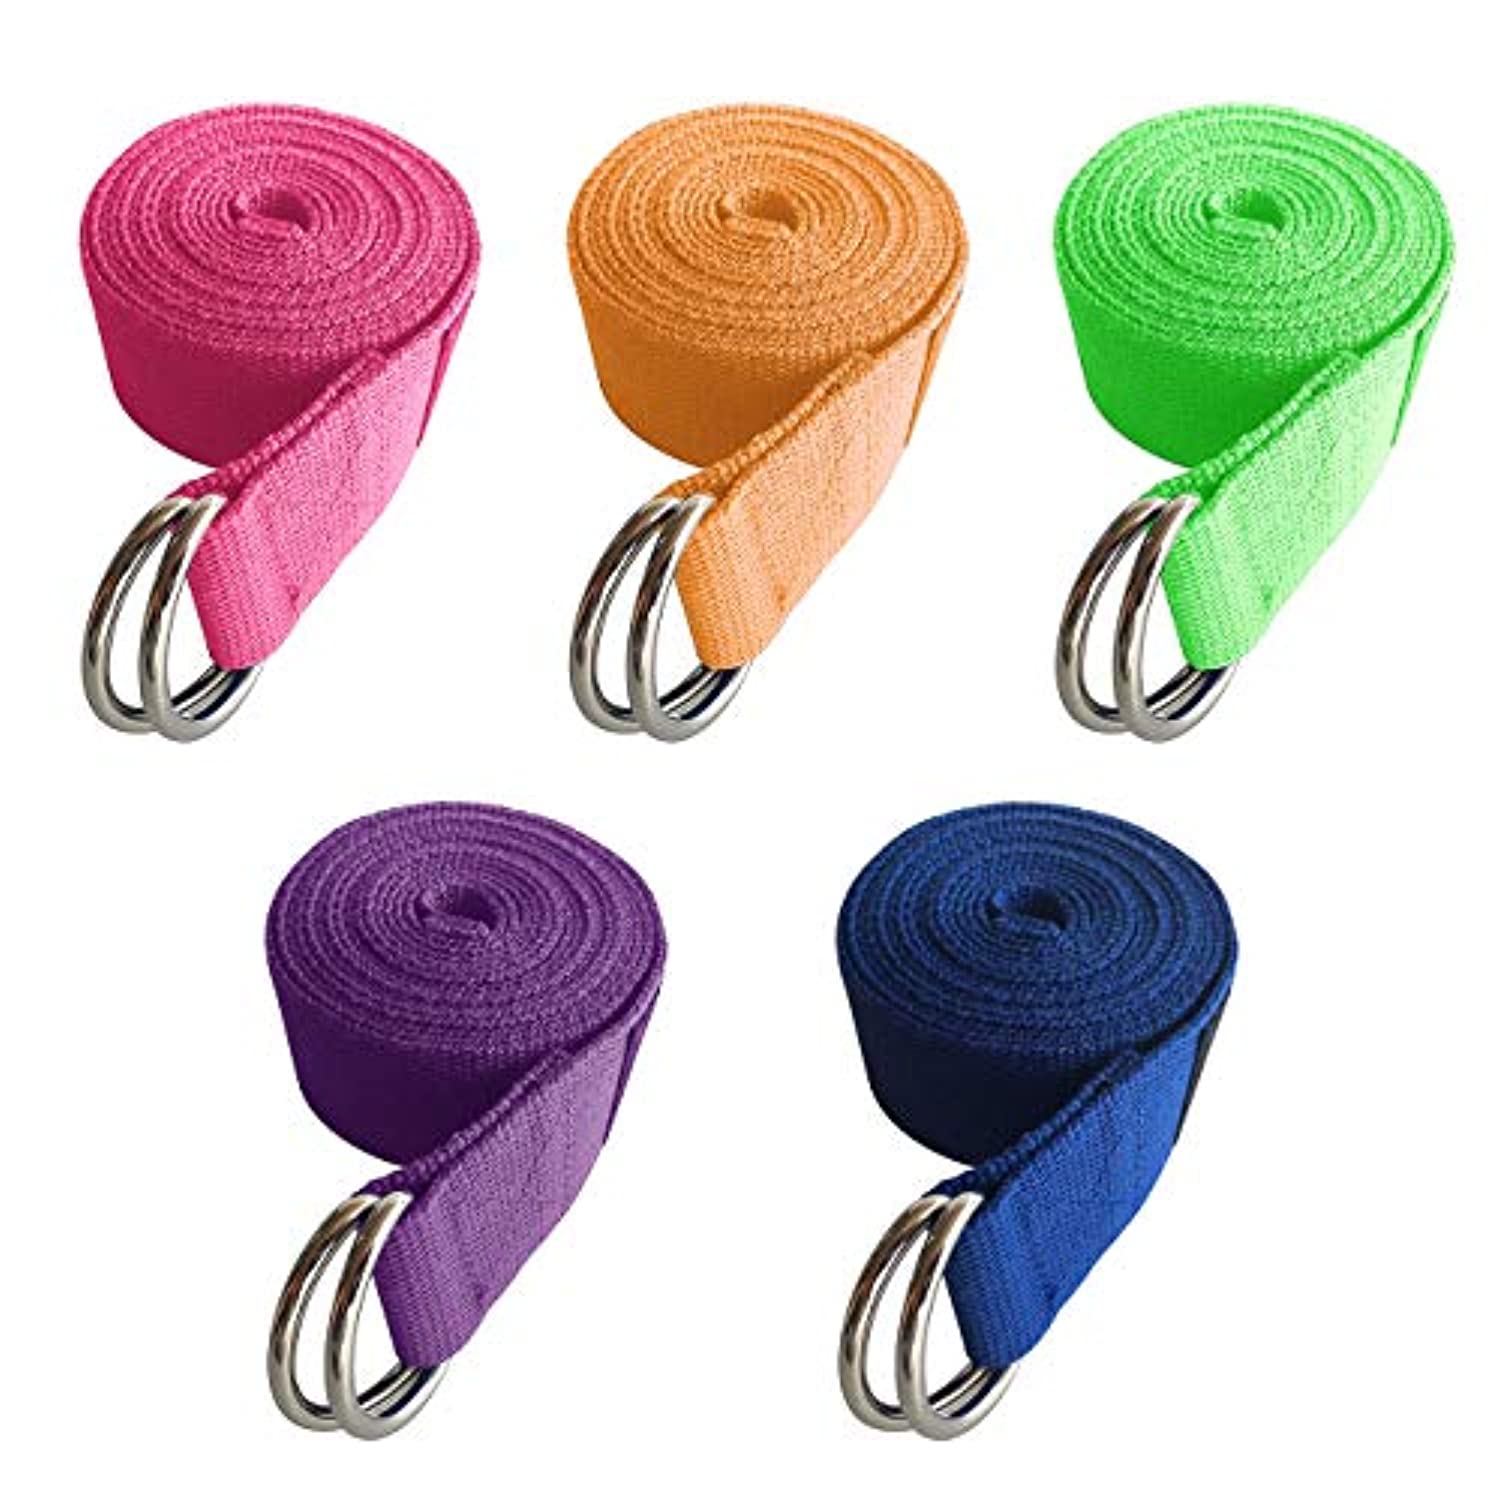 Uheng 5-Pack Yoga Exercise Adjustable Straps 8Ft OR 10Ft with